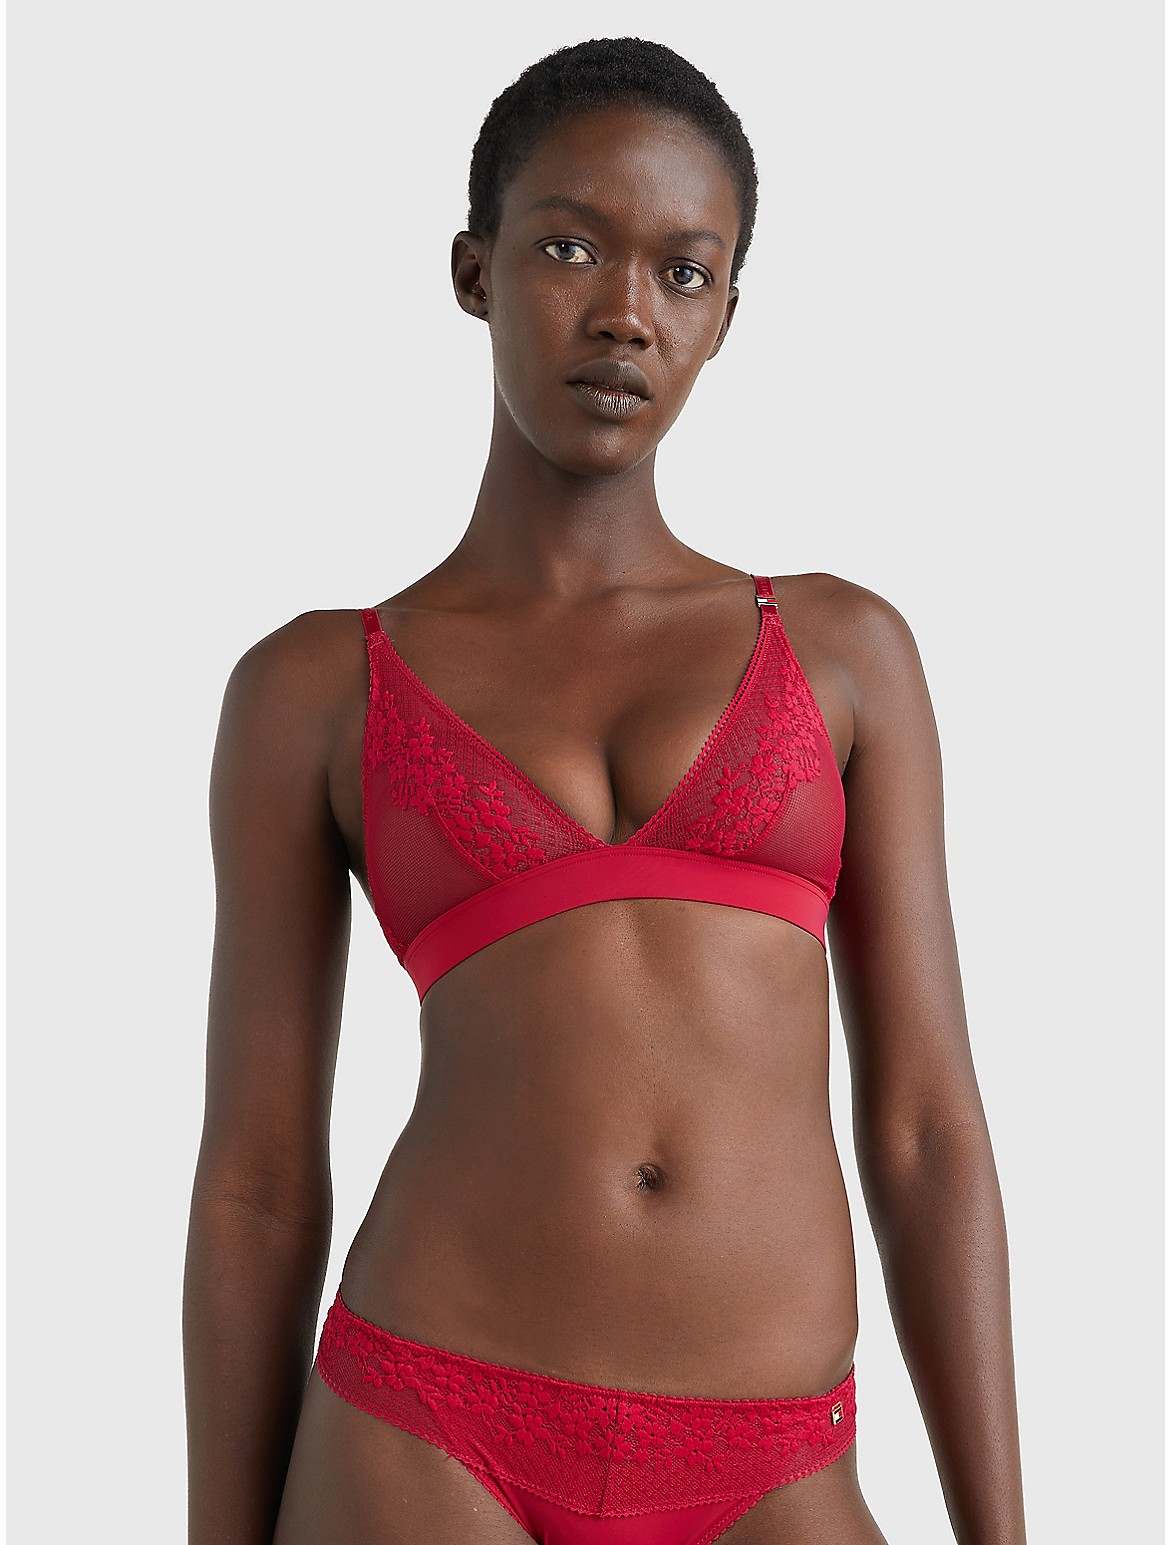 Tommy Hilfiger Women's Floral Unlined Triangle Bralette - Red - XS